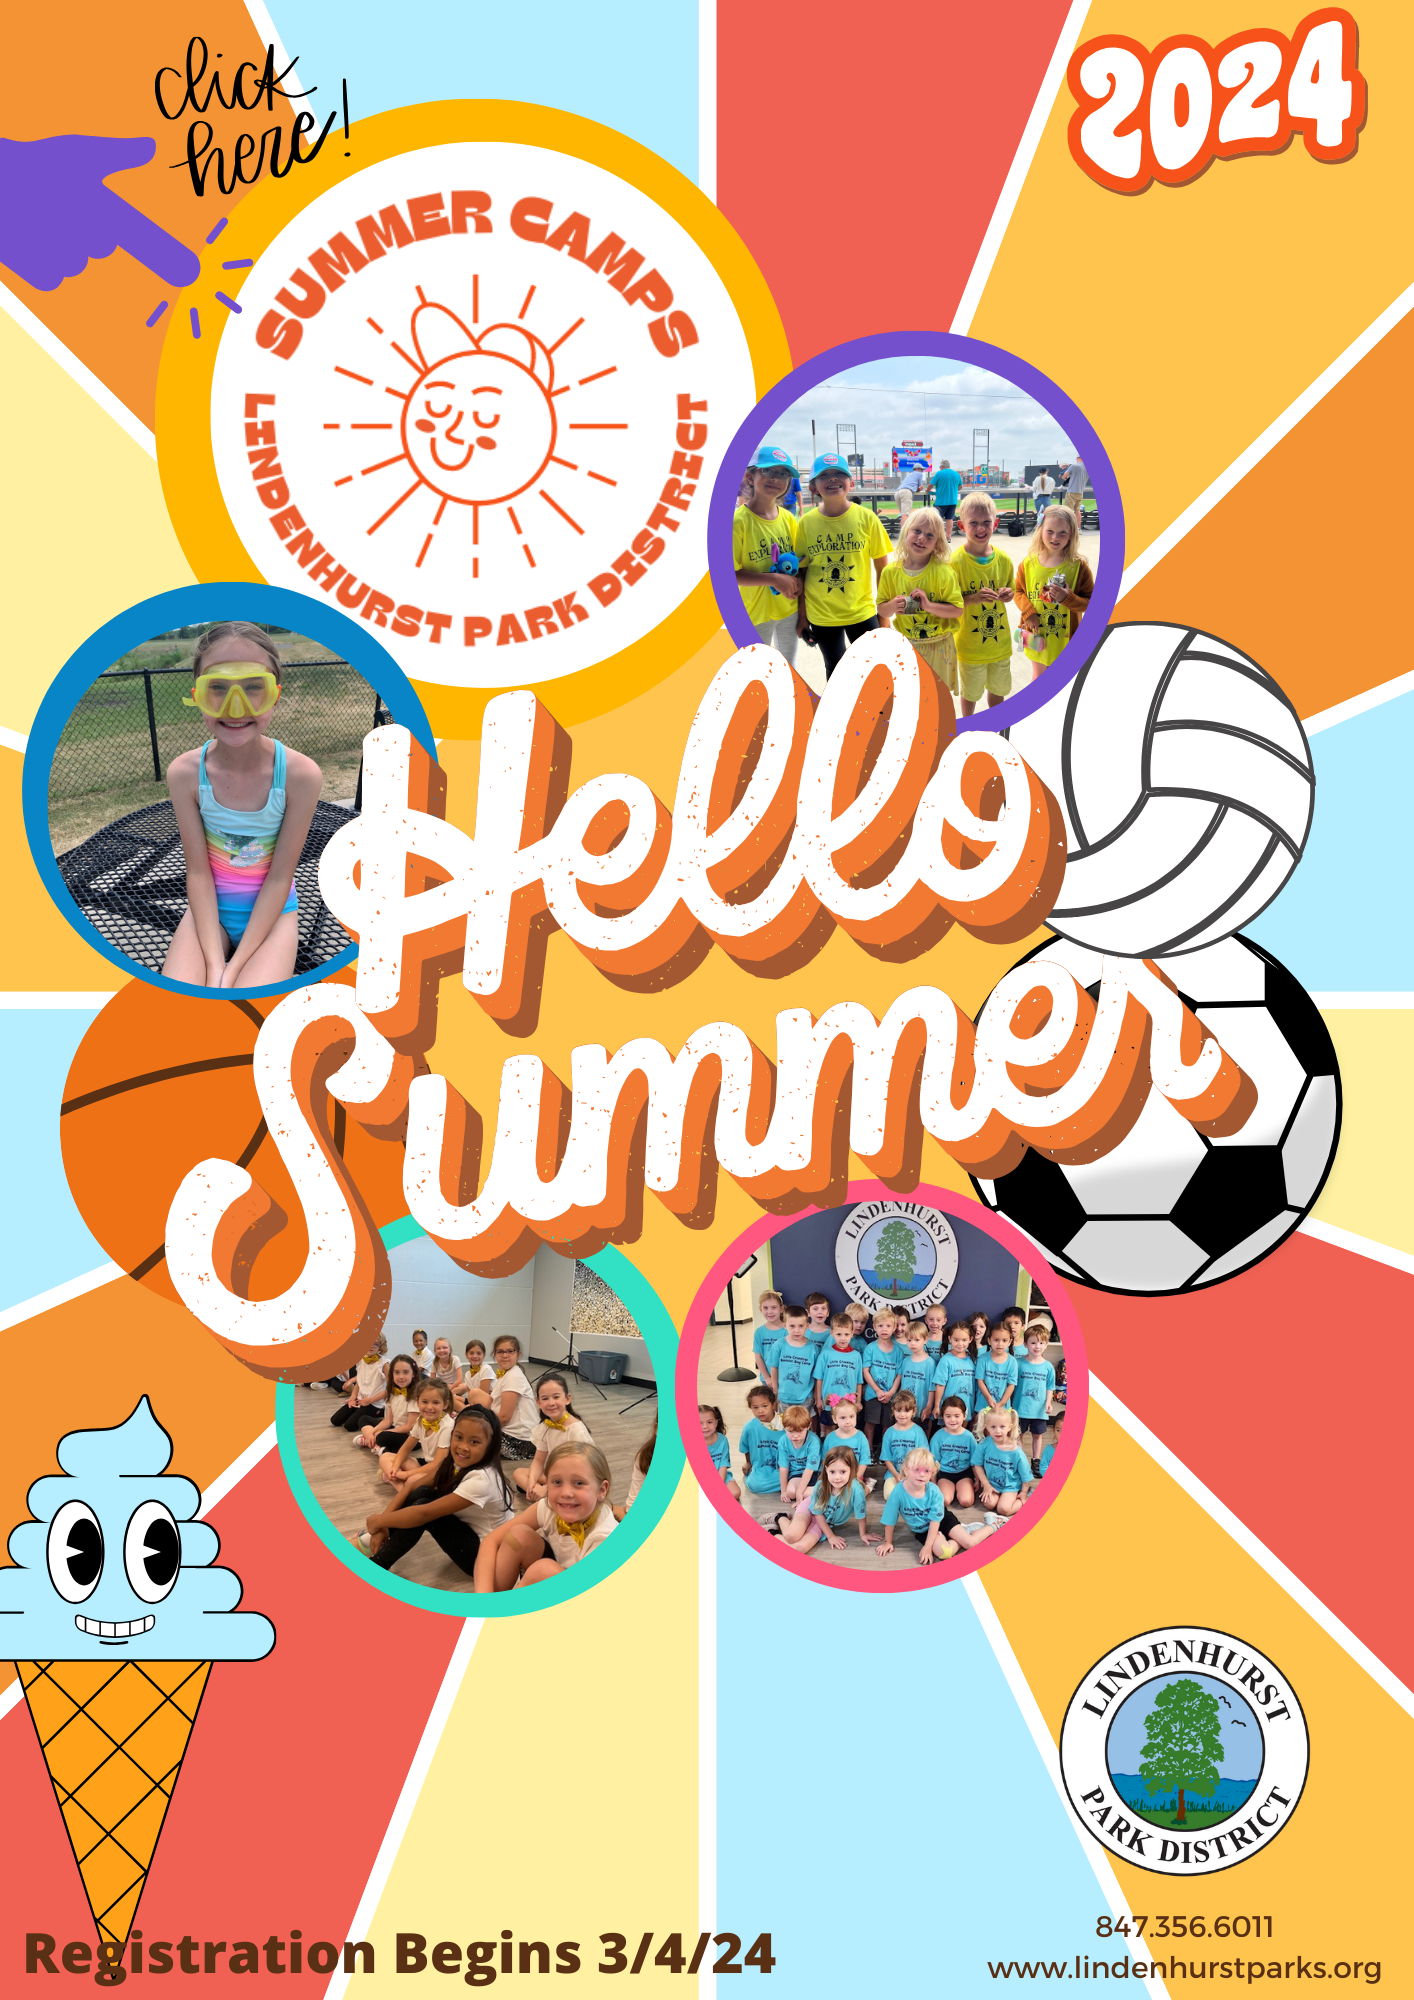 vibrant poster announcing "Hello Summer 2024" with details about summer camps by the Lindenhurst Park District. The poster includes playful images: a child in swim gear, a group in sports attire, children in a classroom setting, and an animated ice cream cone. Sports icons like a volleyball and soccer ball are featured. The call to action "click here" invites online interaction. Registration opens on March 4, 2024, as stated at the bottom, along with contact information and the park district's logo and website.